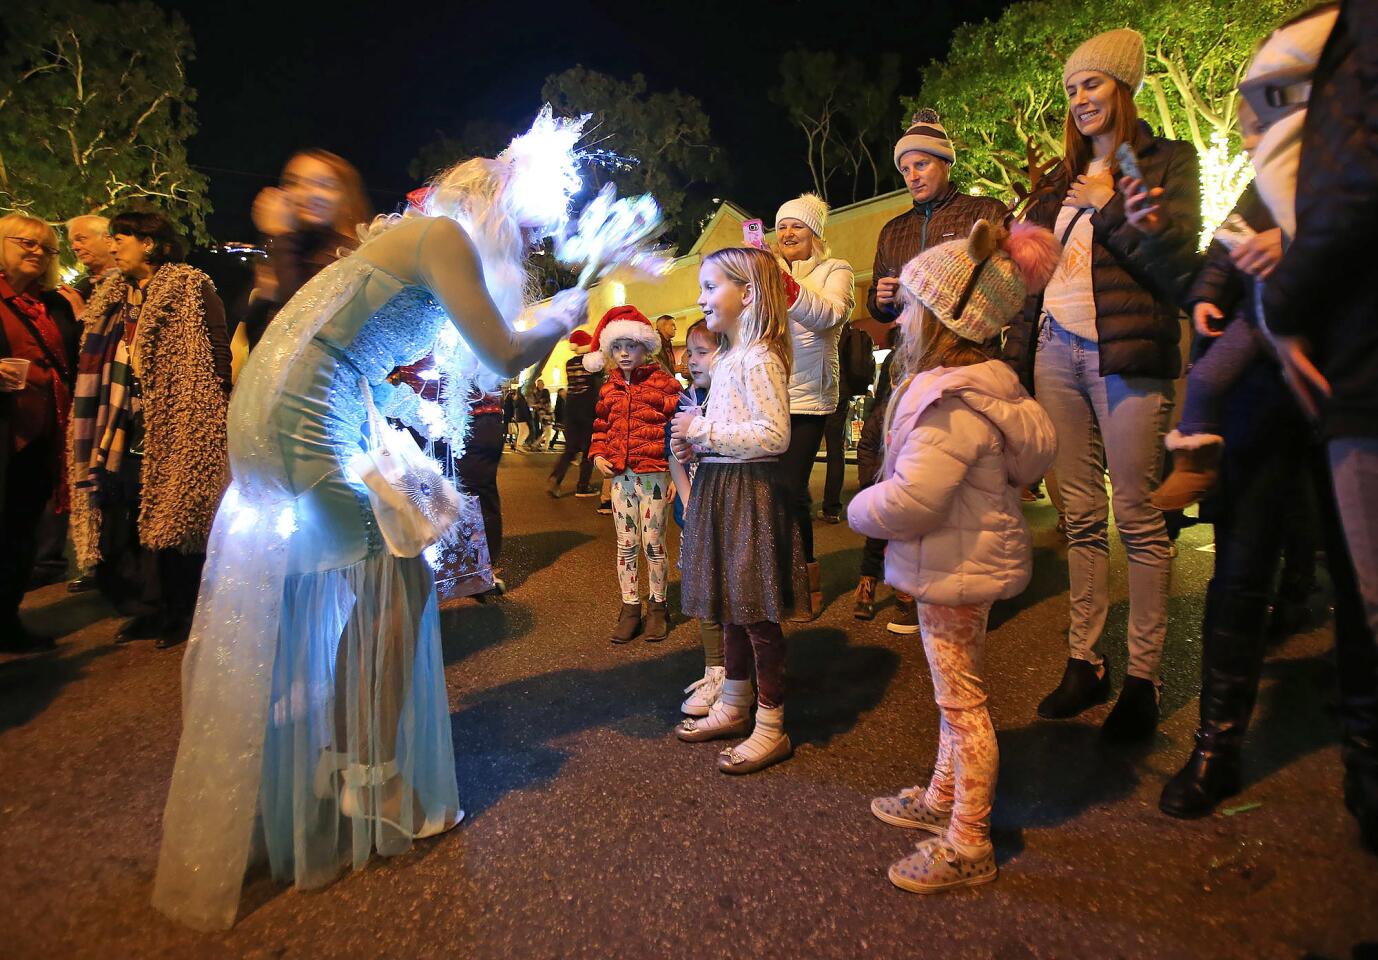 Kids and families gather around Christmas Wish Fairy Jessica Destefano, who blesses them with one wish each during the annual Hospitality Night 2018 on Forest Ave. in downtown Laguna Beach on Friday.